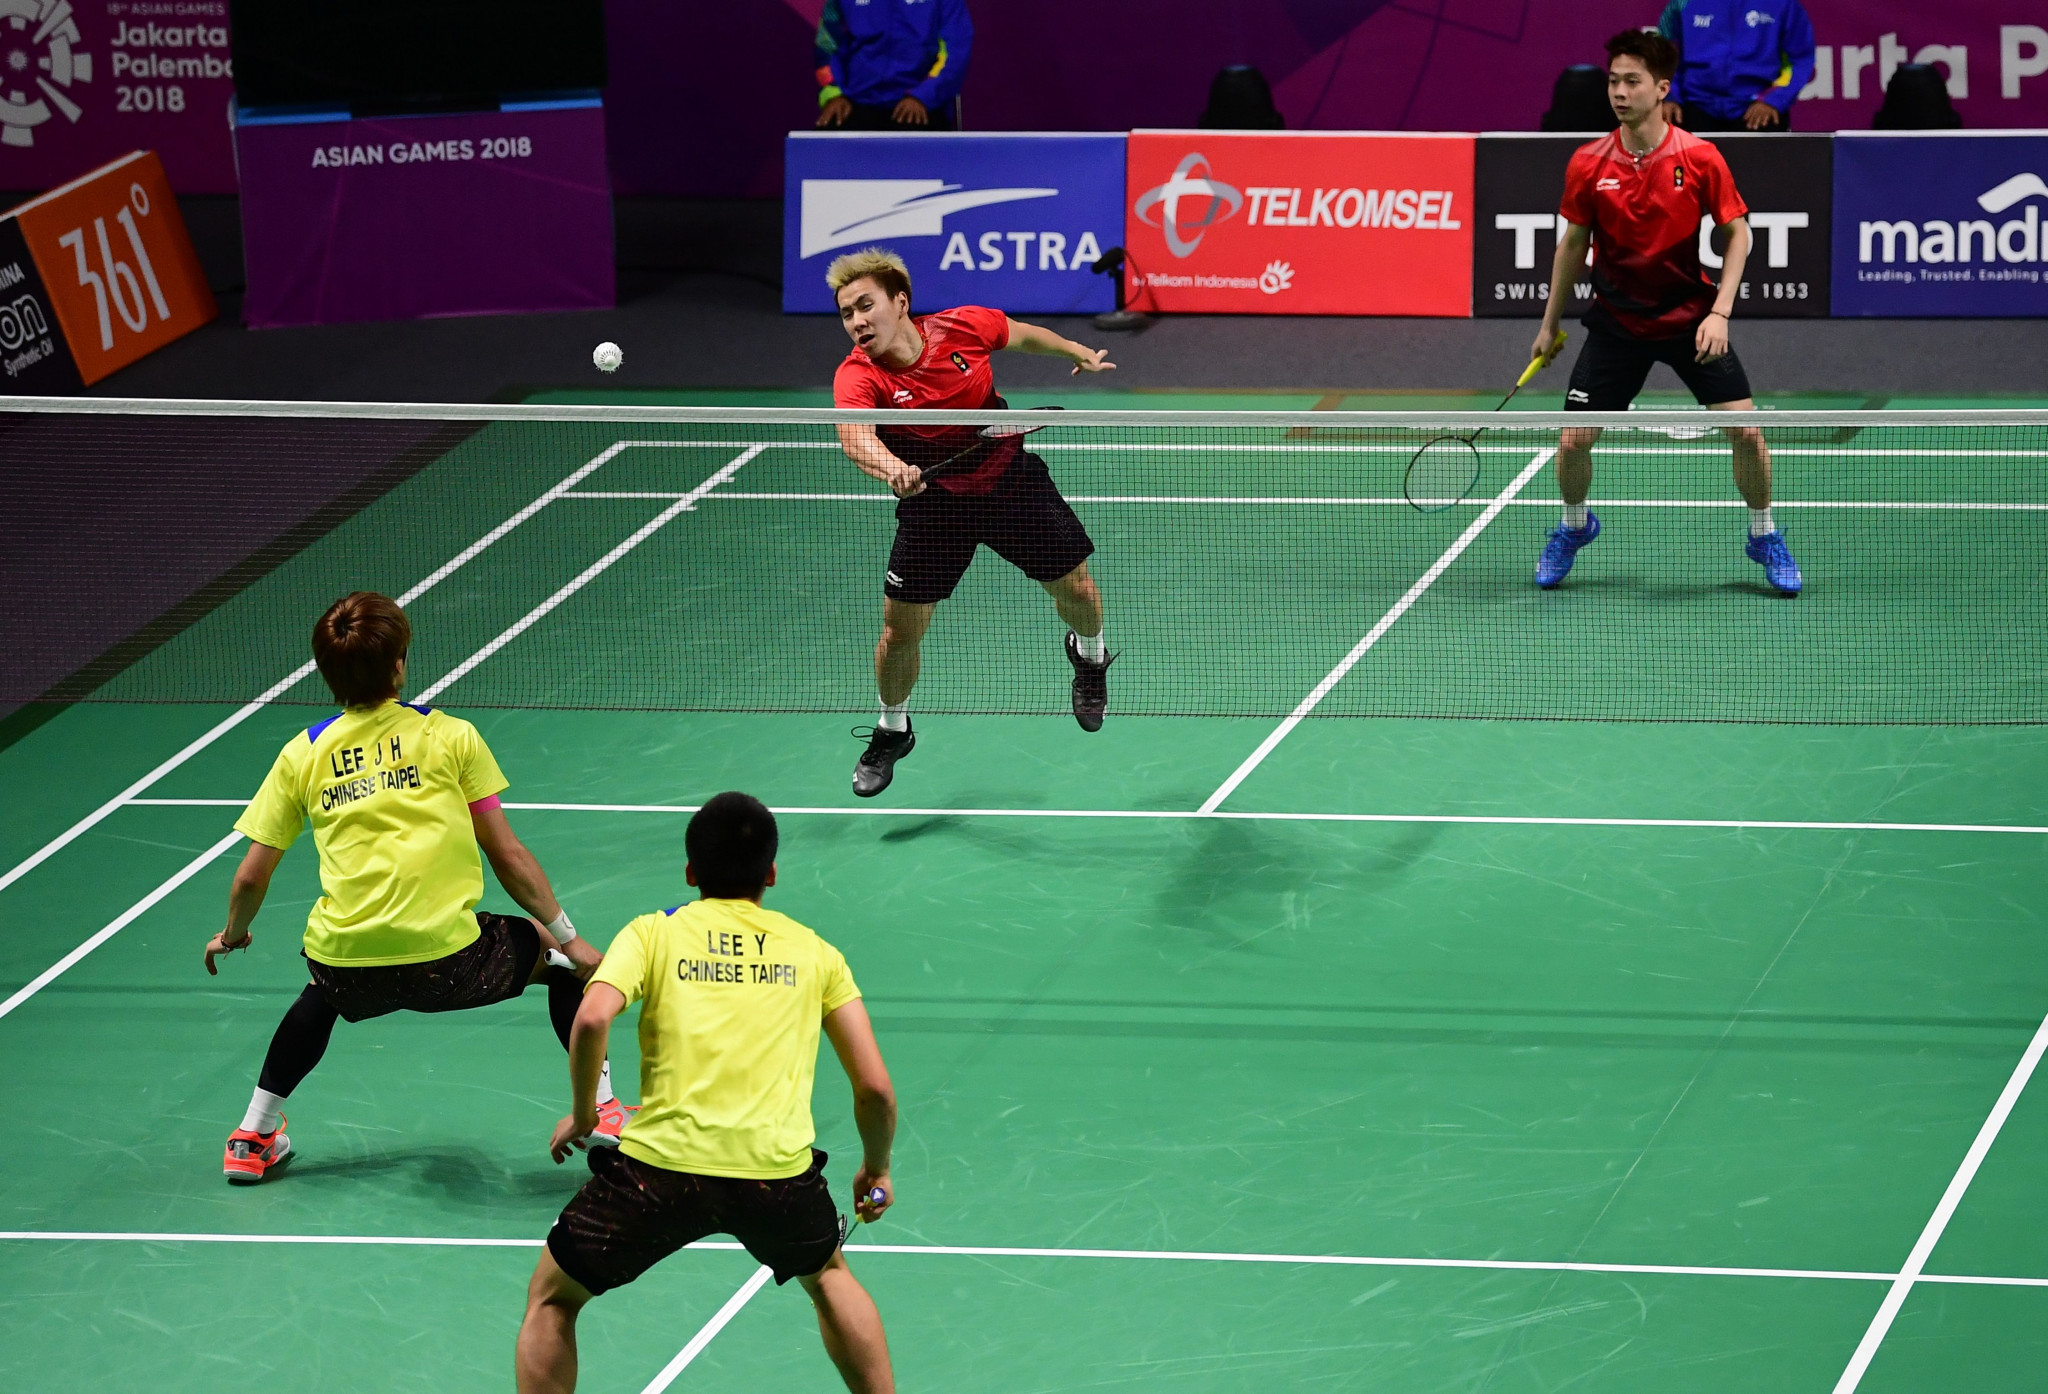 Chinese Taipei had a strong start to the tournament, clinching most of the final qualification slots ©Getty Images